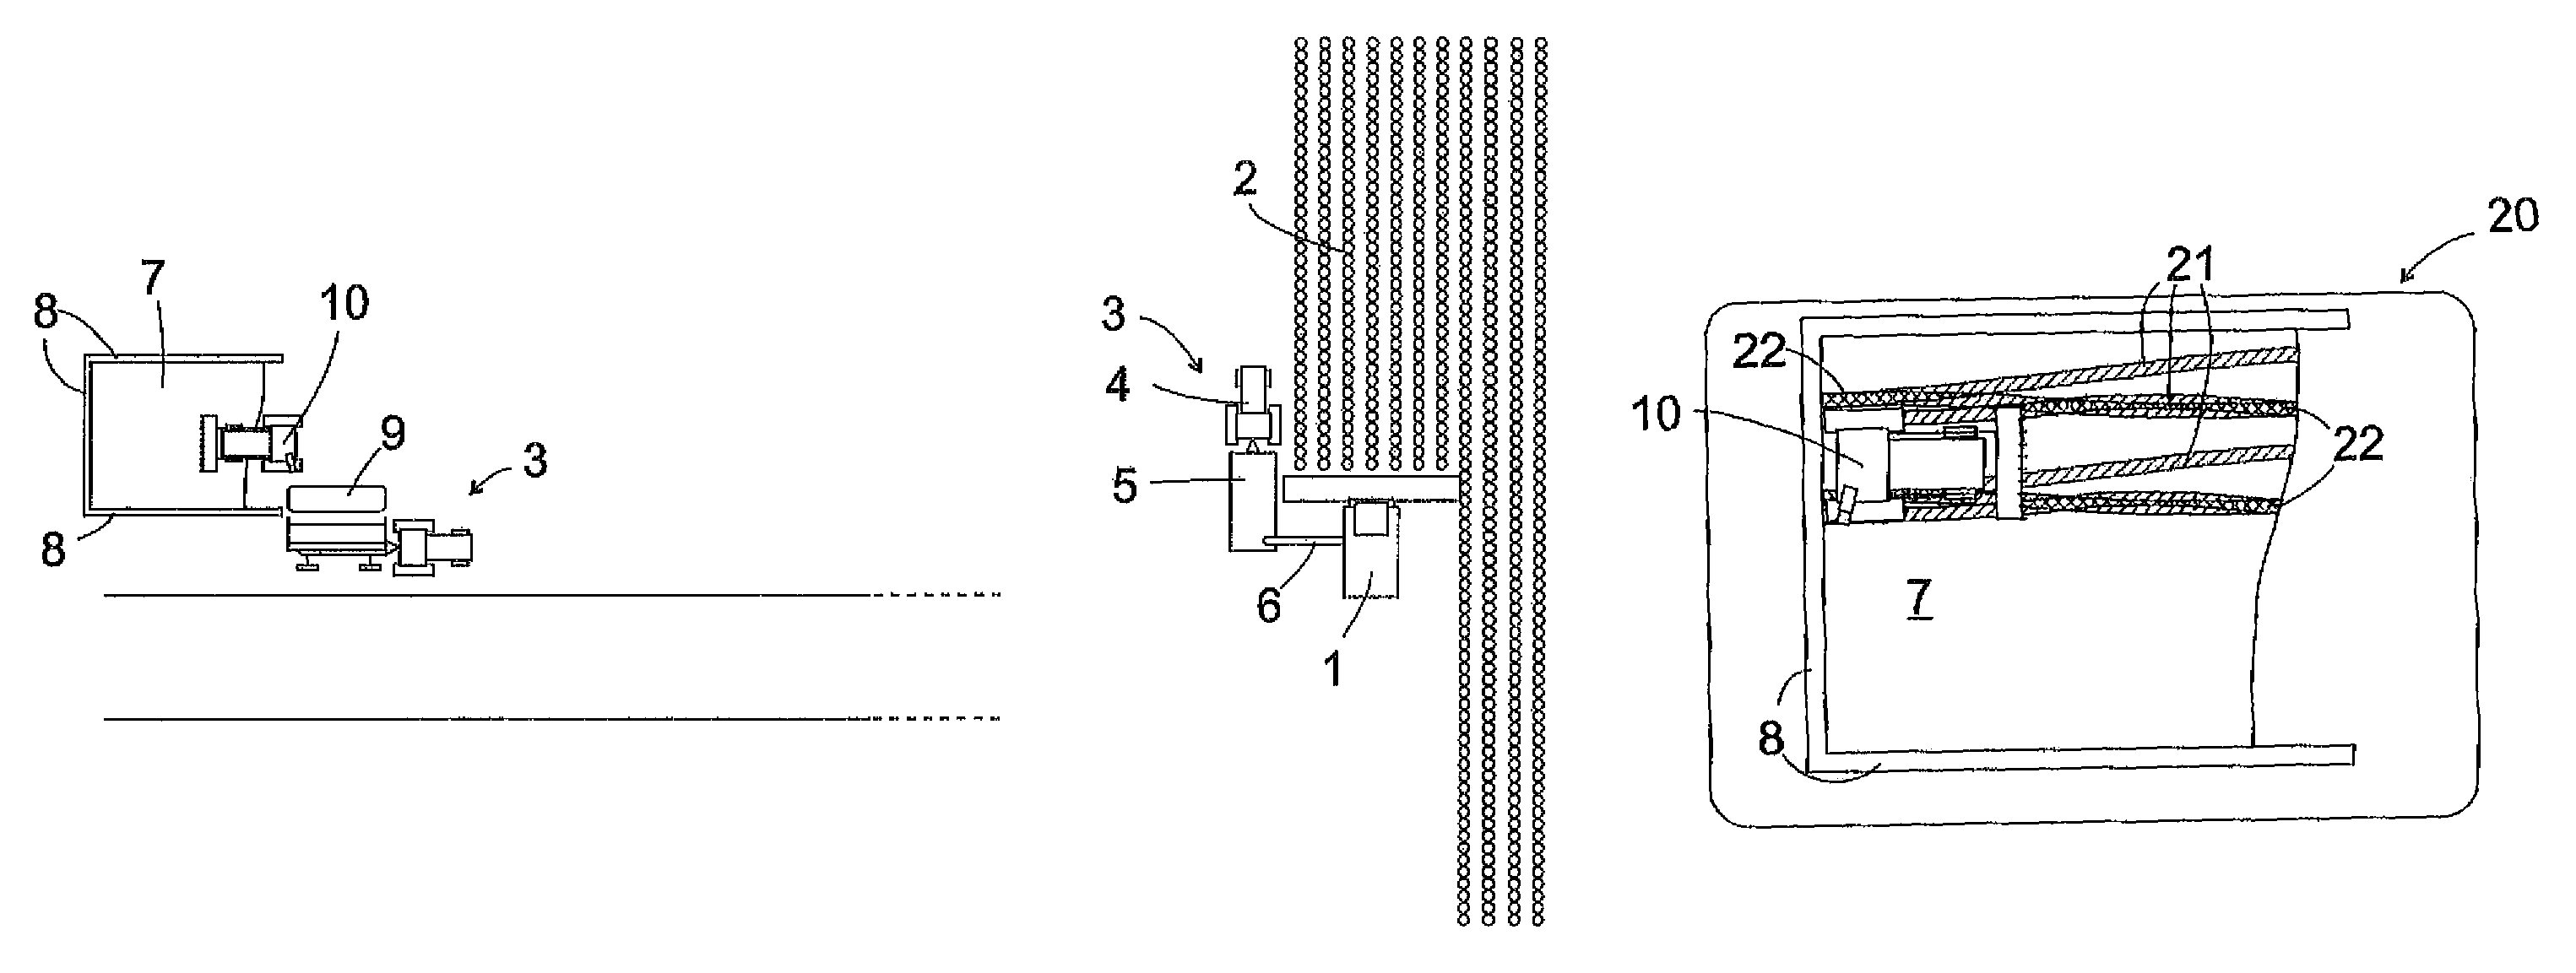 Method and system for harvesting and ensilage of feed material